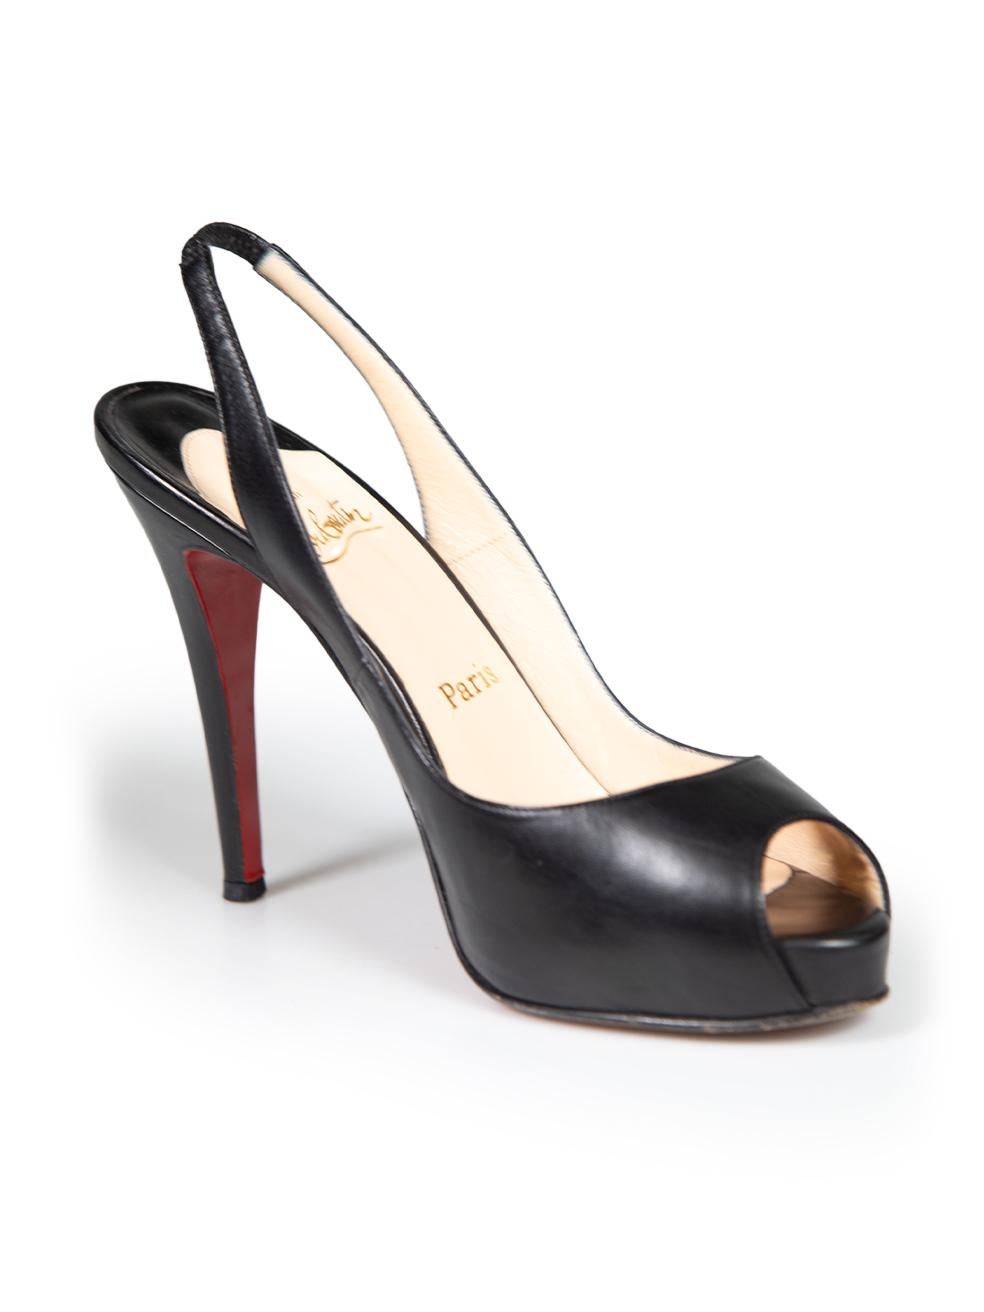 CONDITION is Good. Minor wear to heels is evident. Light scratches and indents to both heels especially near the heel stem. A couple of tiny scratches to the inner sides of both shoes on this used Christian Louboutin designer resale item.
 
 
 
